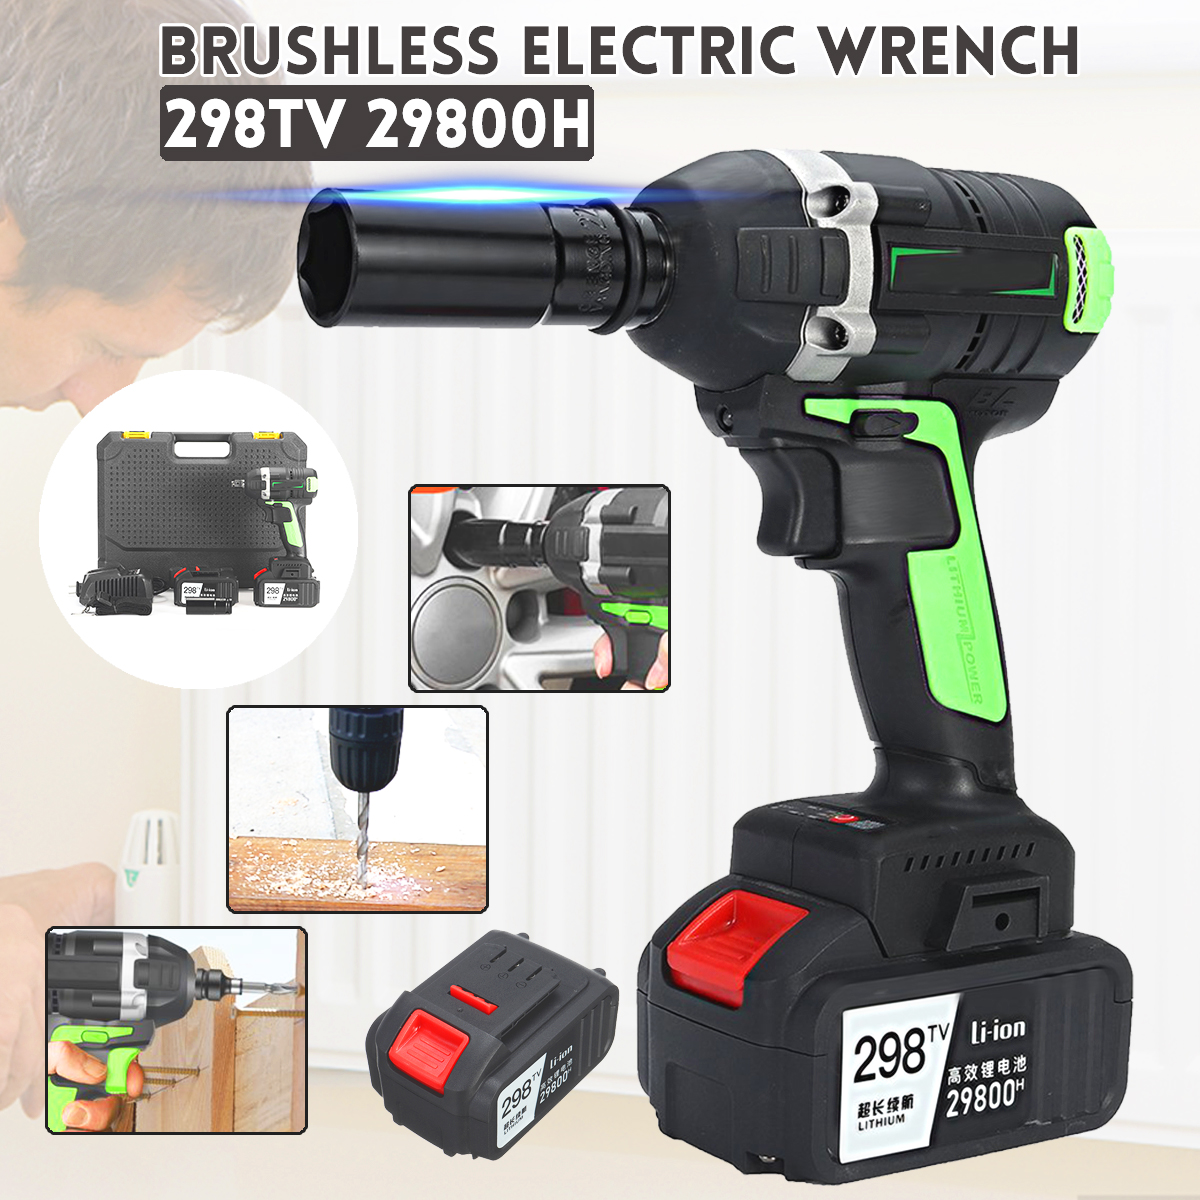 198TV 19800H Brushless Electric Wrench 480N.M High Torque Wrench Stepless Speed Powerful Wrench Tool